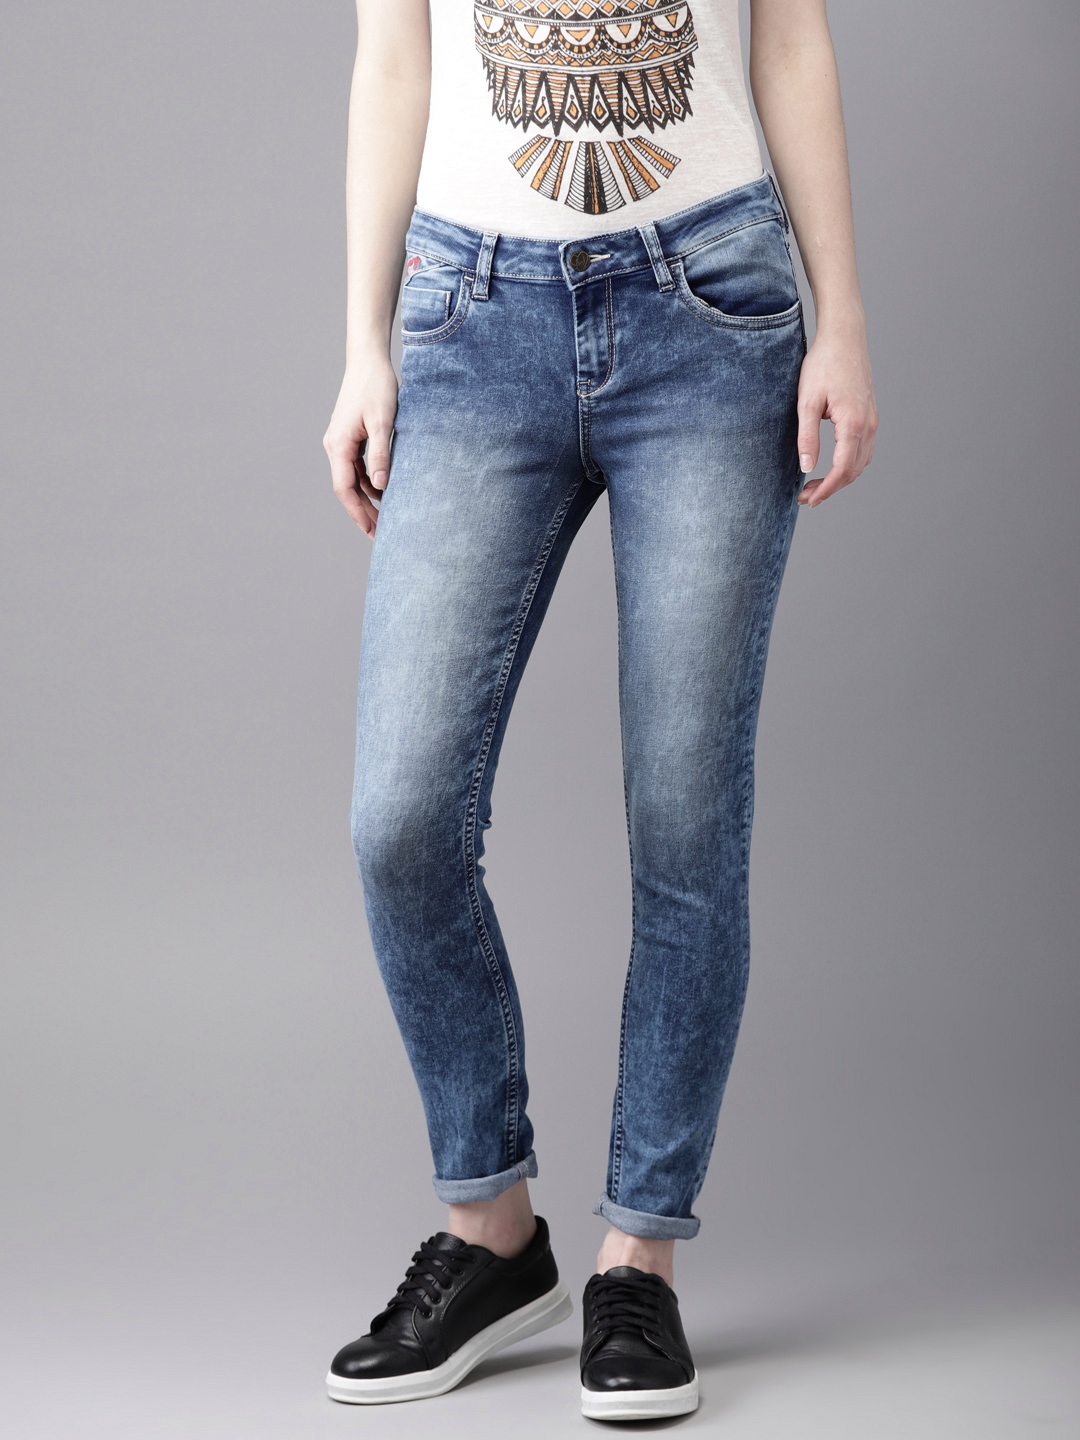 flying machine stretchable jeans